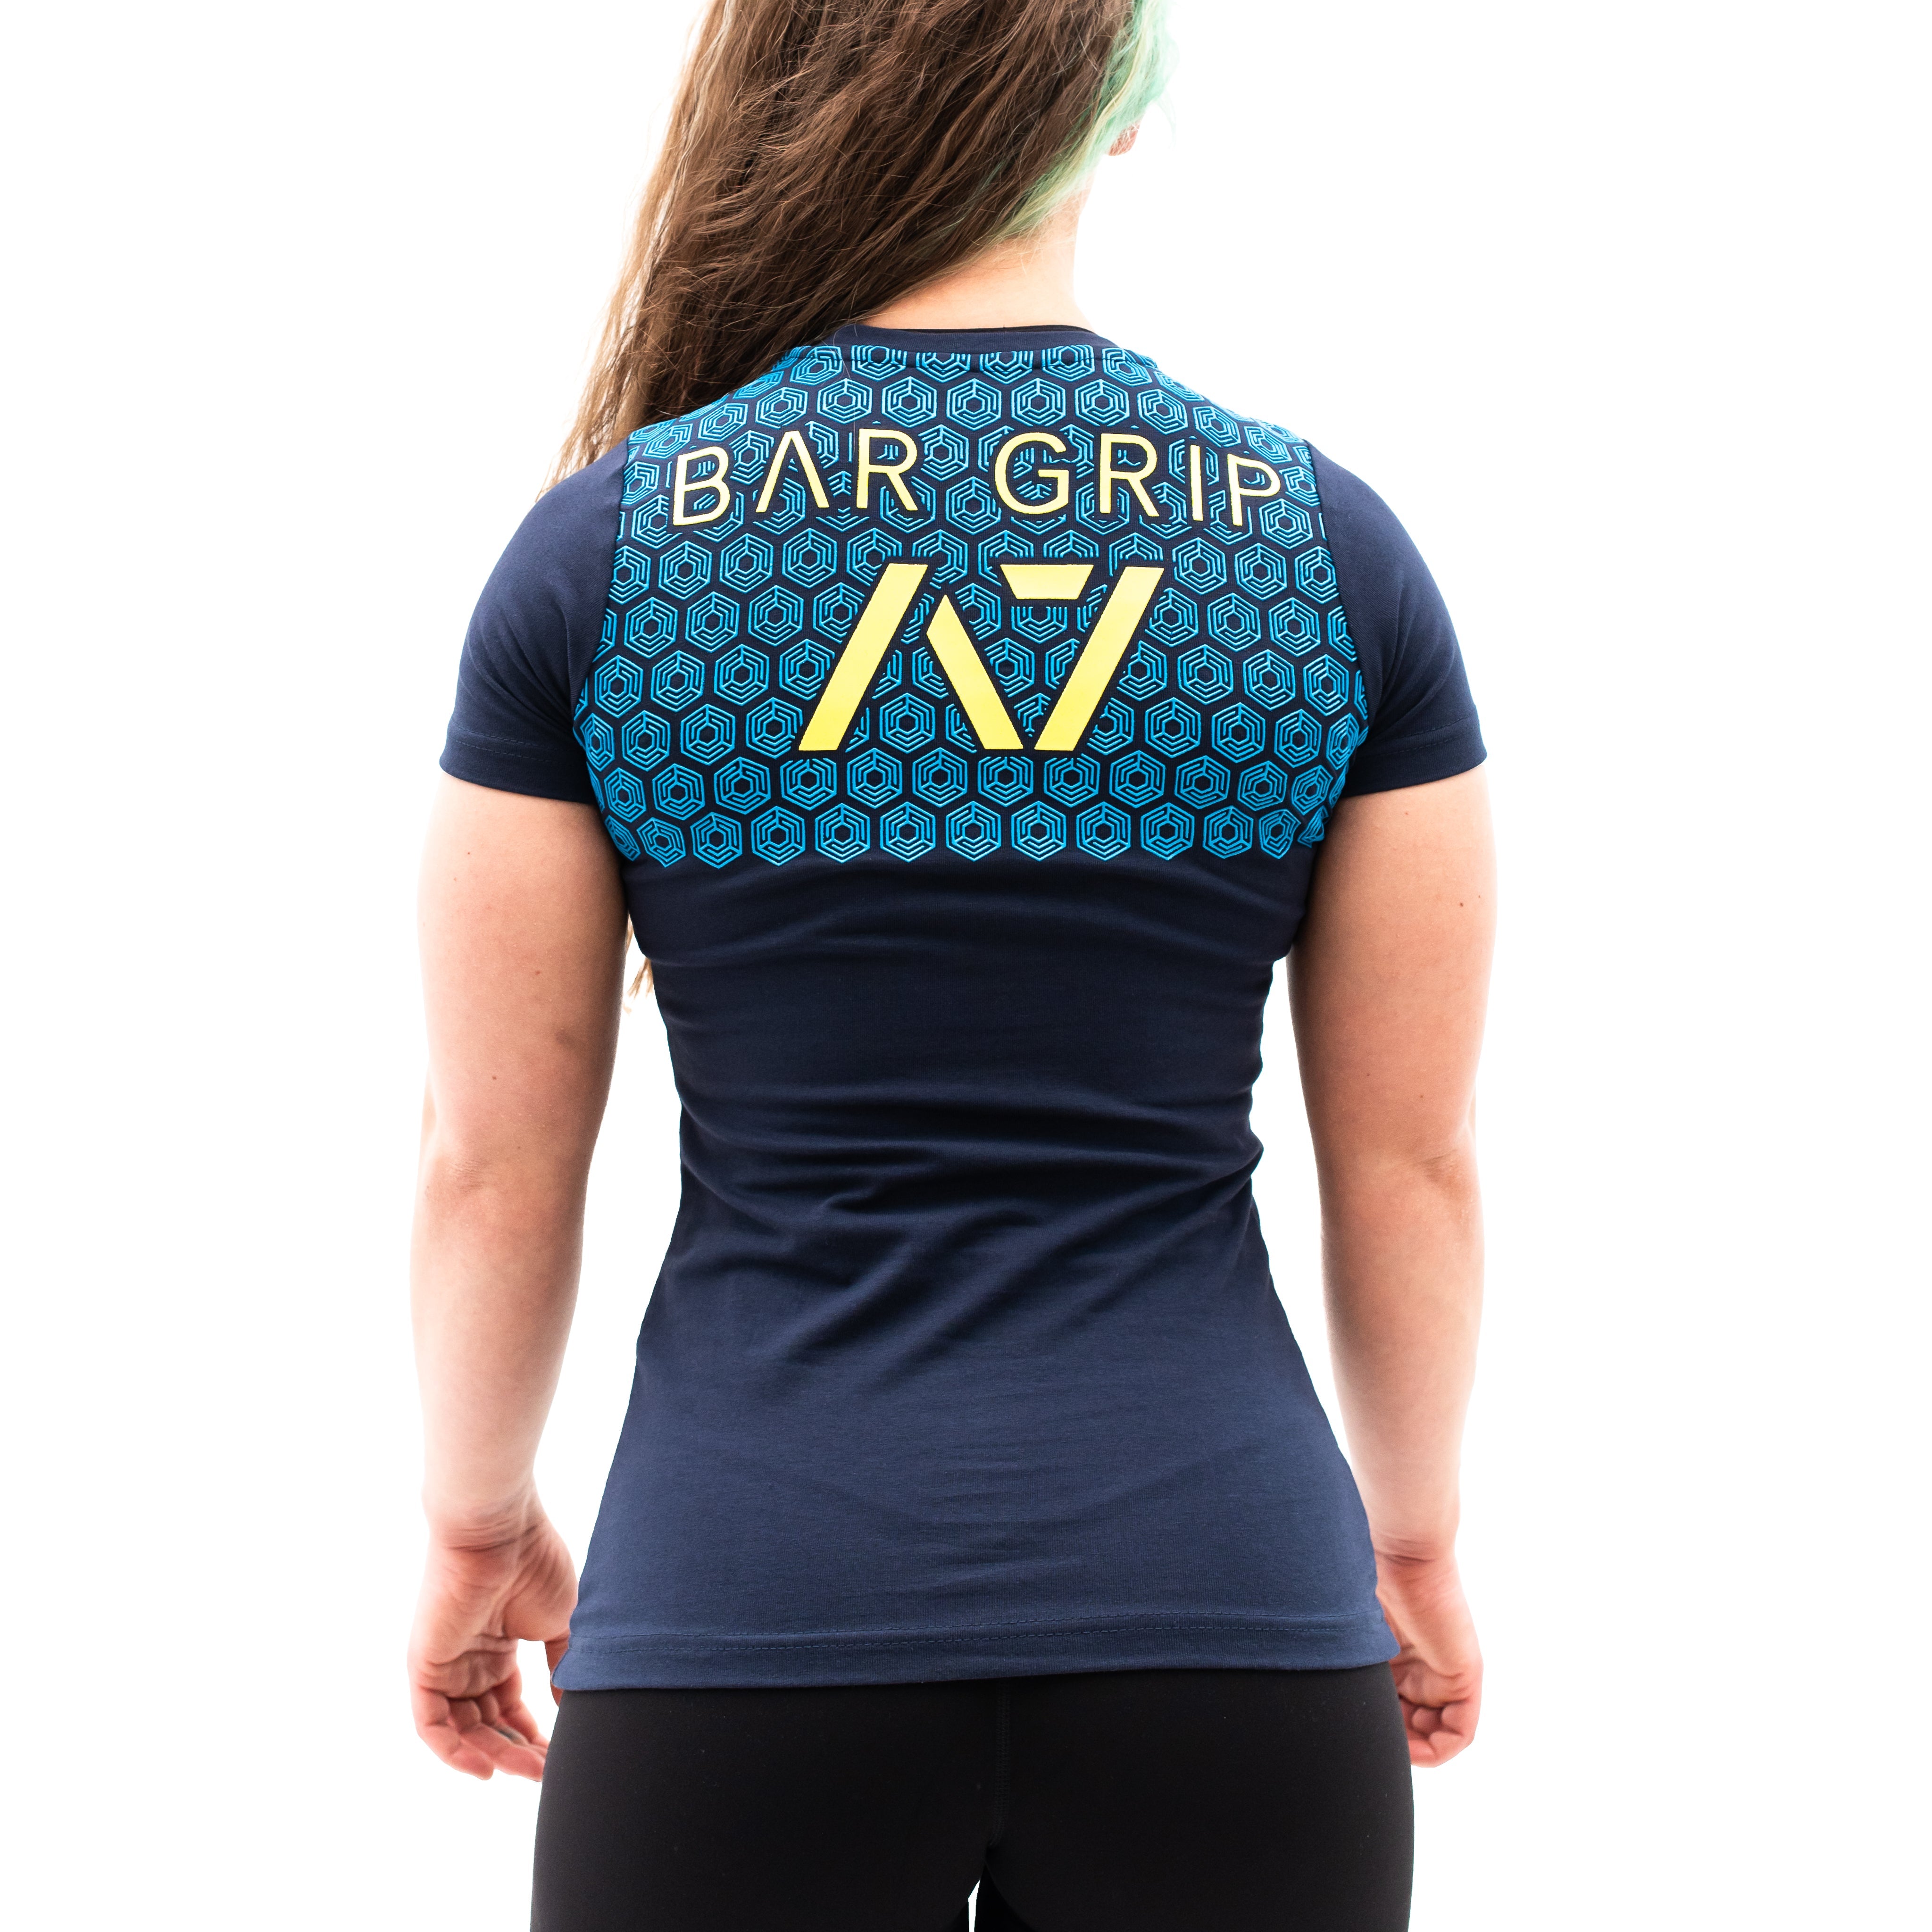 The Seveneers League bar grip - we demand greatness from life and never stop progressing towards out goals! A7 bar grip helps you stick to the bench during bench press and anchors the barbell to your back when squatting. Bar Grip is the ultimate training shirt for powerlifting, strongman and weightlifting workouts. Seveneers Bar Grip is a perfect gift for a powerlifter. Purchase Seveneers League Bar Grip from A7 UK for shipping to UK.